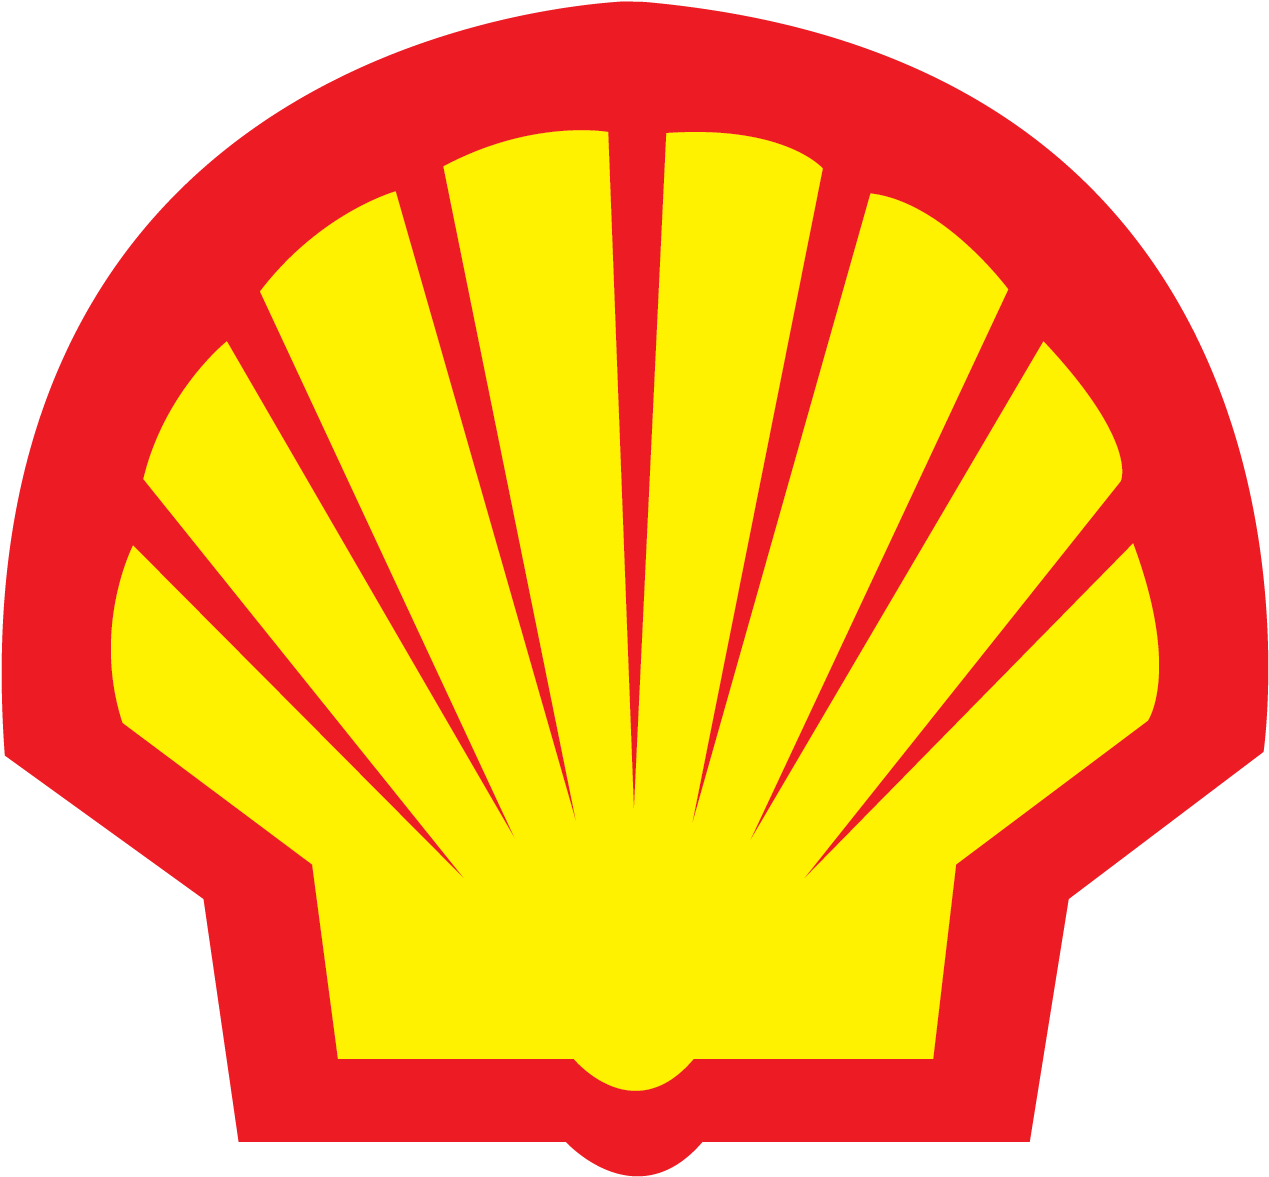 Bob Stivers Shell Stations In San Diego - Shell Company Of Thailand (1320x1245), Png Download